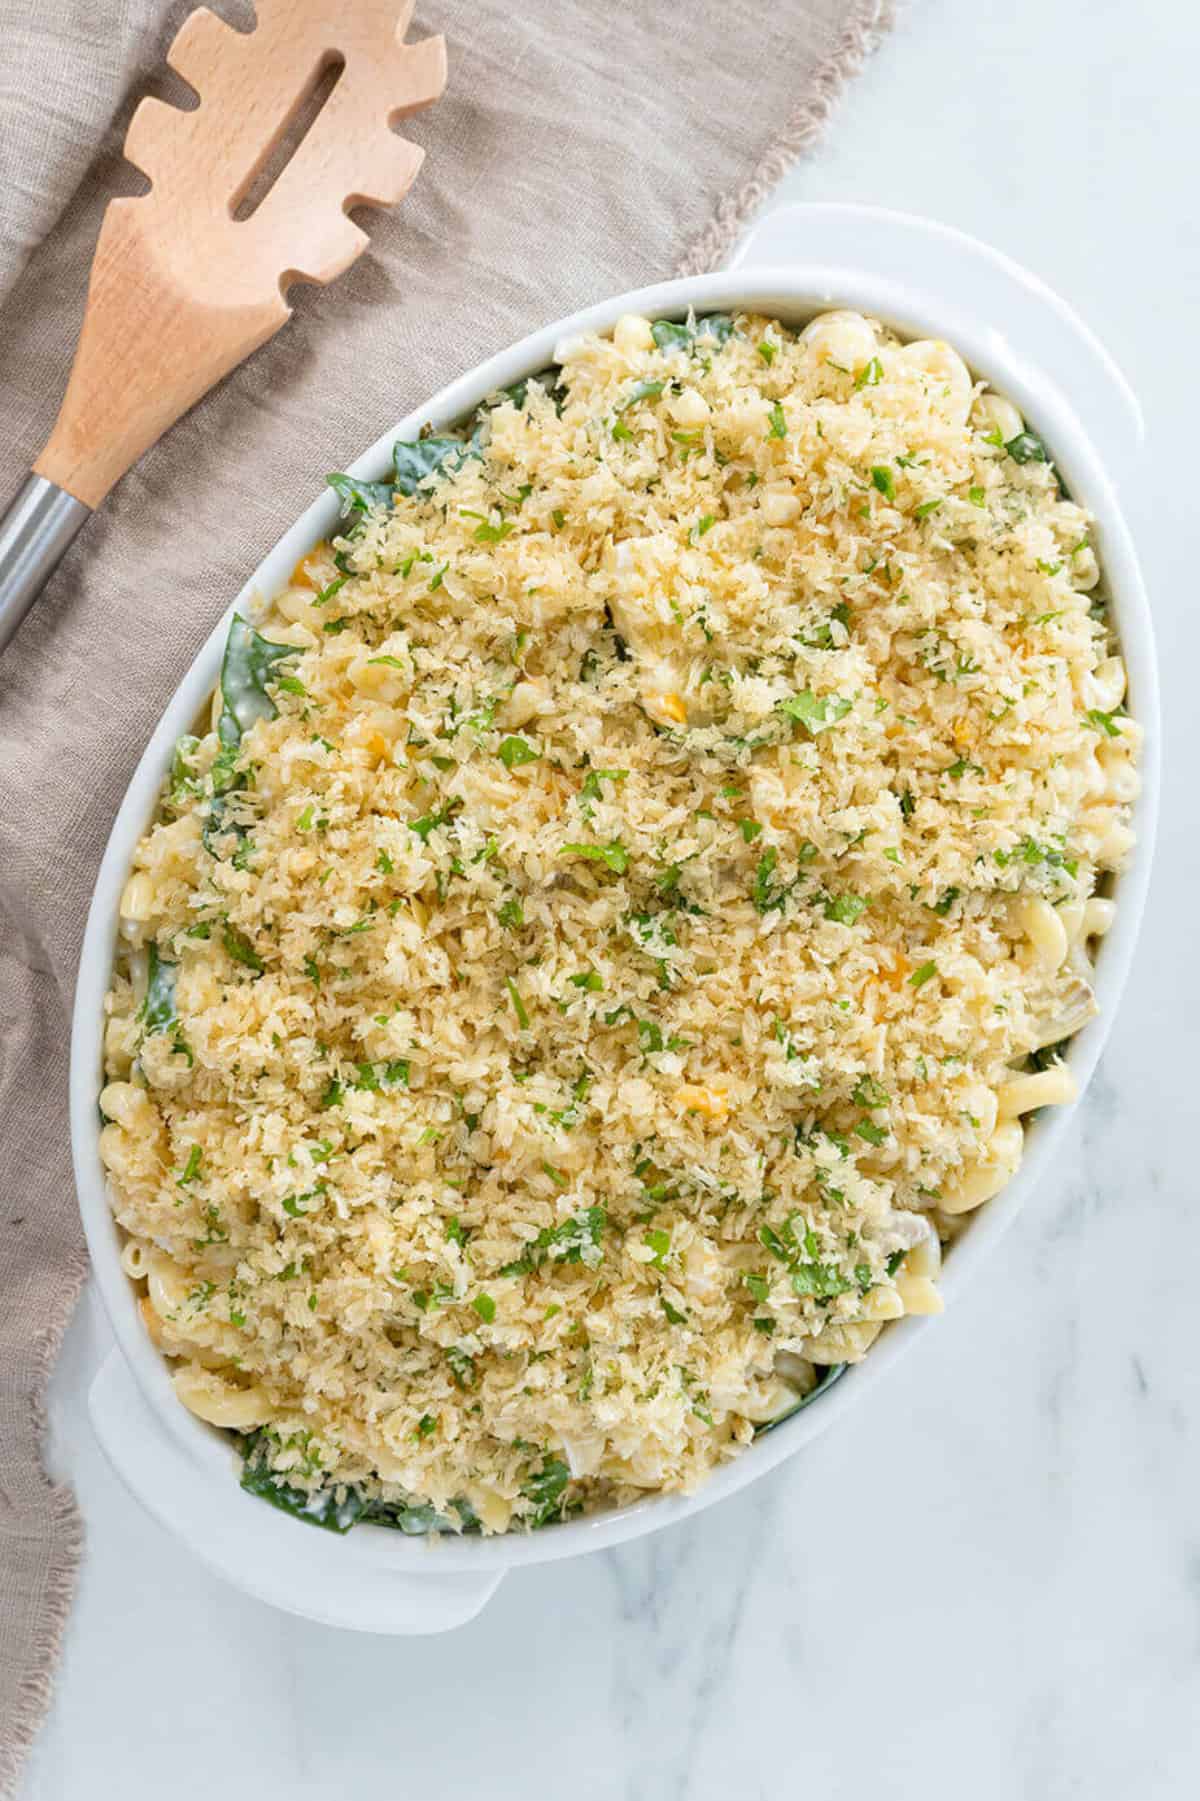 crumbs on top of Spinach Artichoke Baked Pasta.